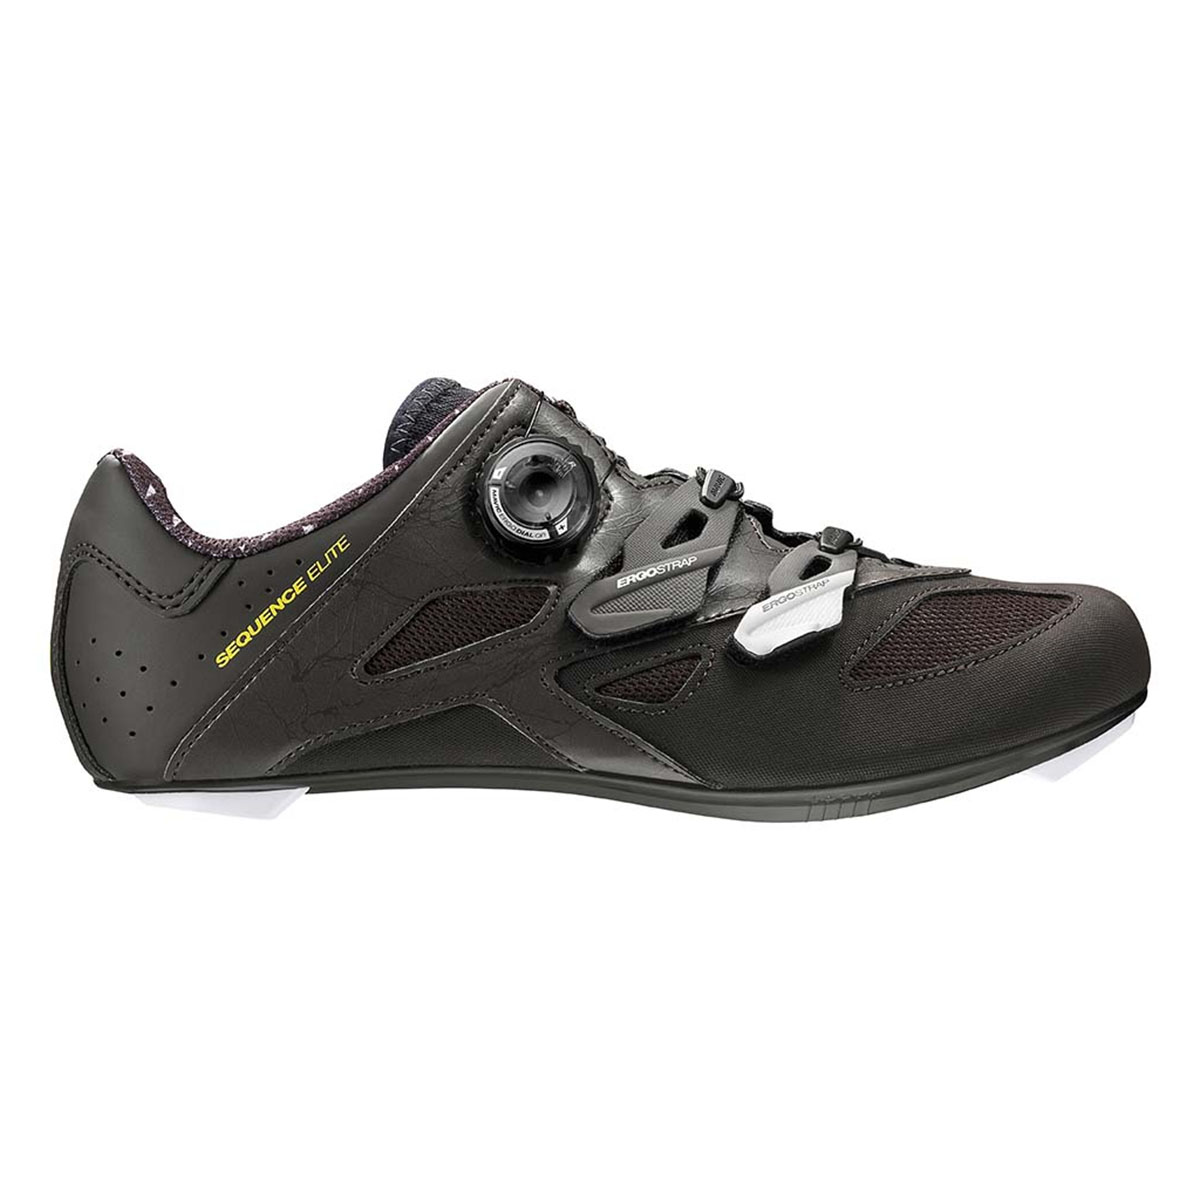  CHAUSSURES MAVIC ROUTE SEQUENCE ELITE FEMME